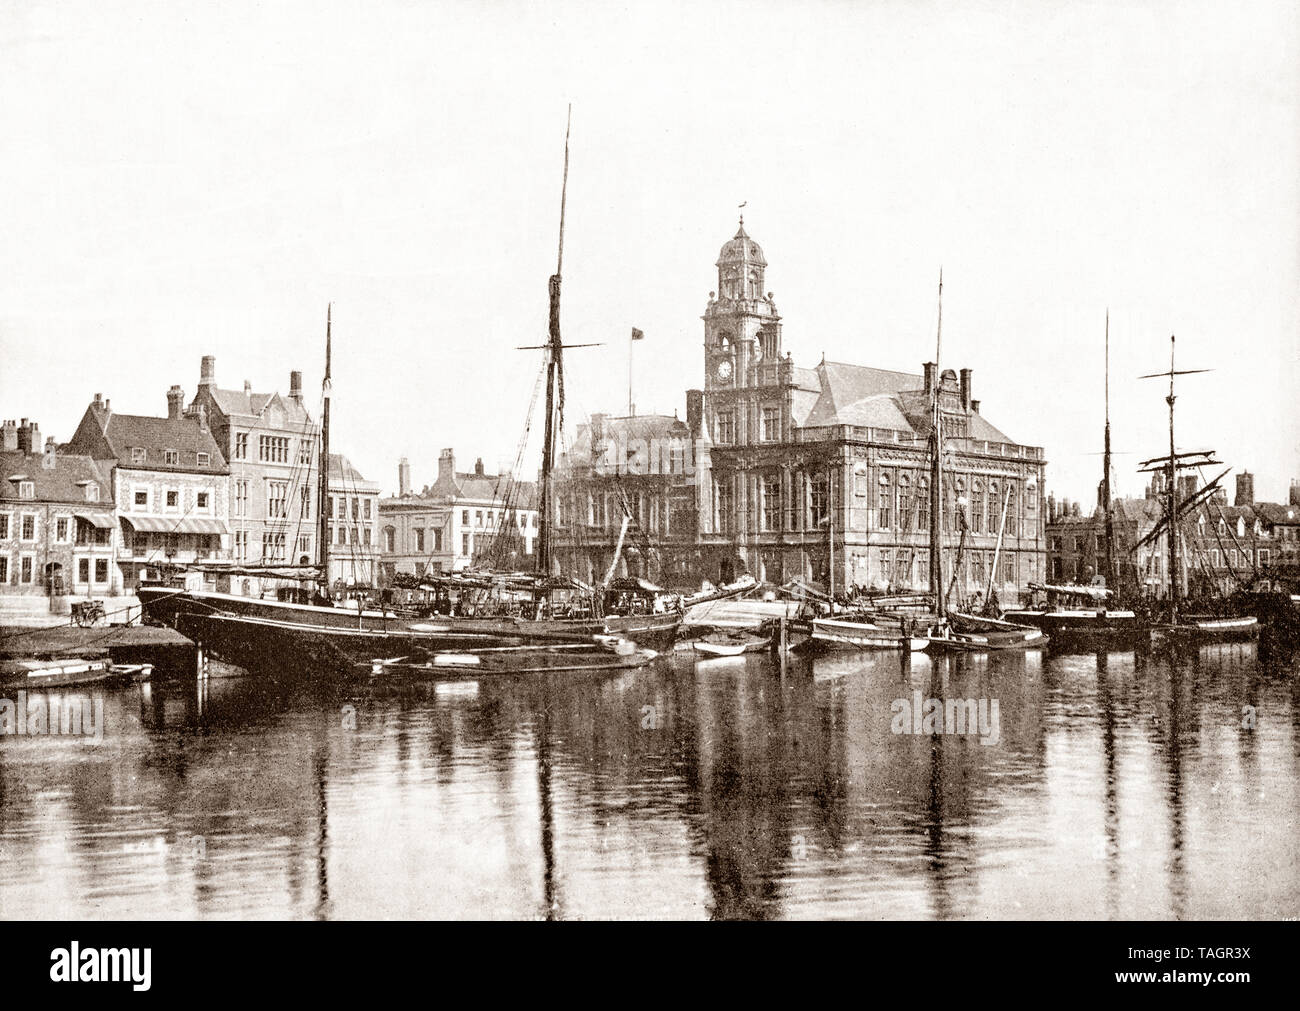 A late 19th Century view of the harbour and Town Hall built in the 1880s and a classic example of fine Victorian Gothic architecture in Great Yarmouth, aka Yarmouth, a seaside town in Norfolk, England. It has been a seaside resort since 1760 and rose to prominence when a railway built in 1844 gave visitors easier and cheaper access and triggered an influx of settlers. Stock Photo